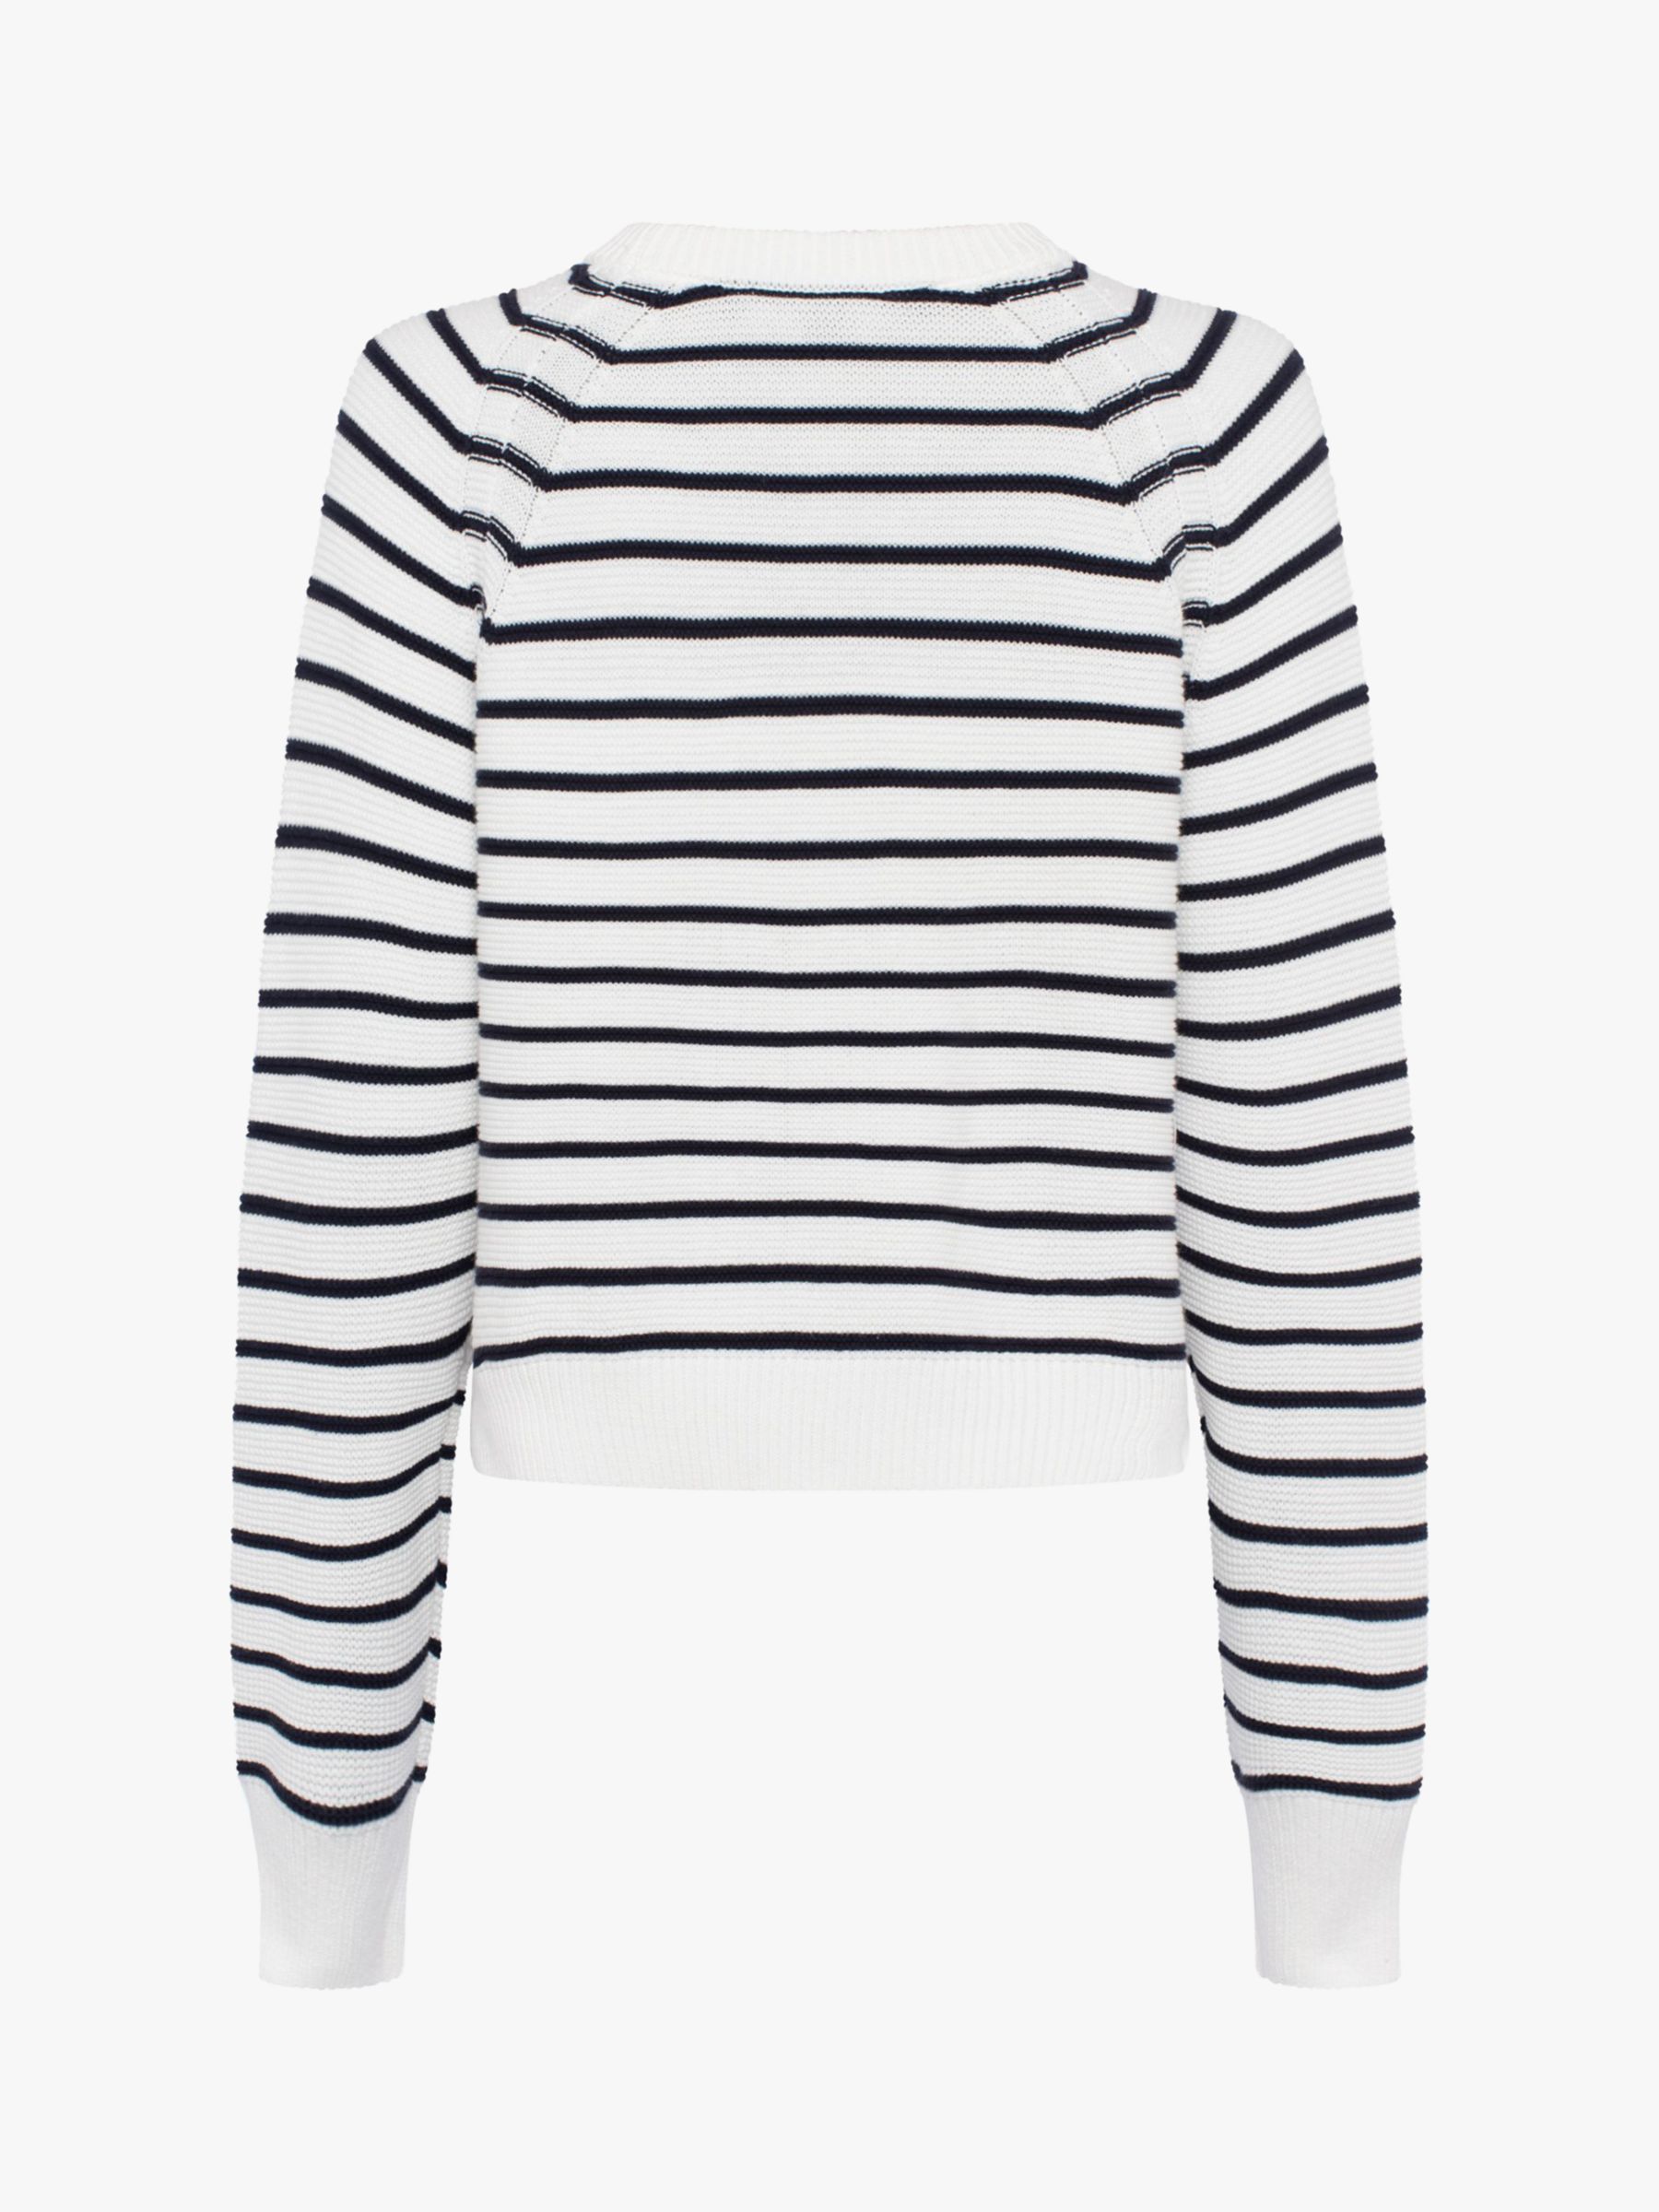 French Connection Lillie Mozart Stripe Jumper, Summer White/Utility Blue, XS